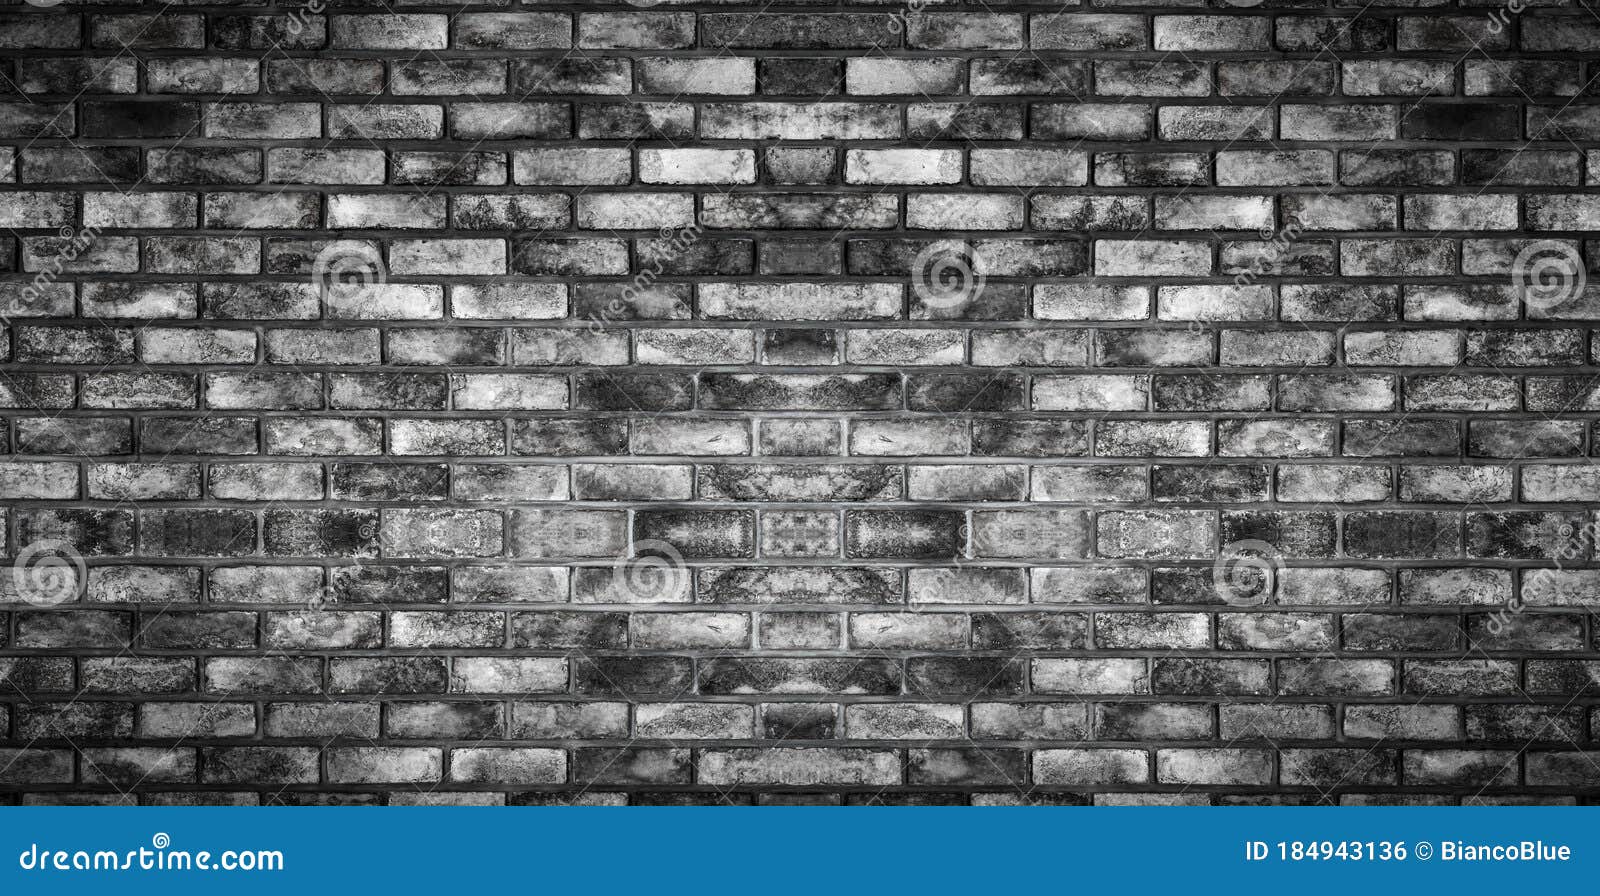 background of brick wall with old texture pattern